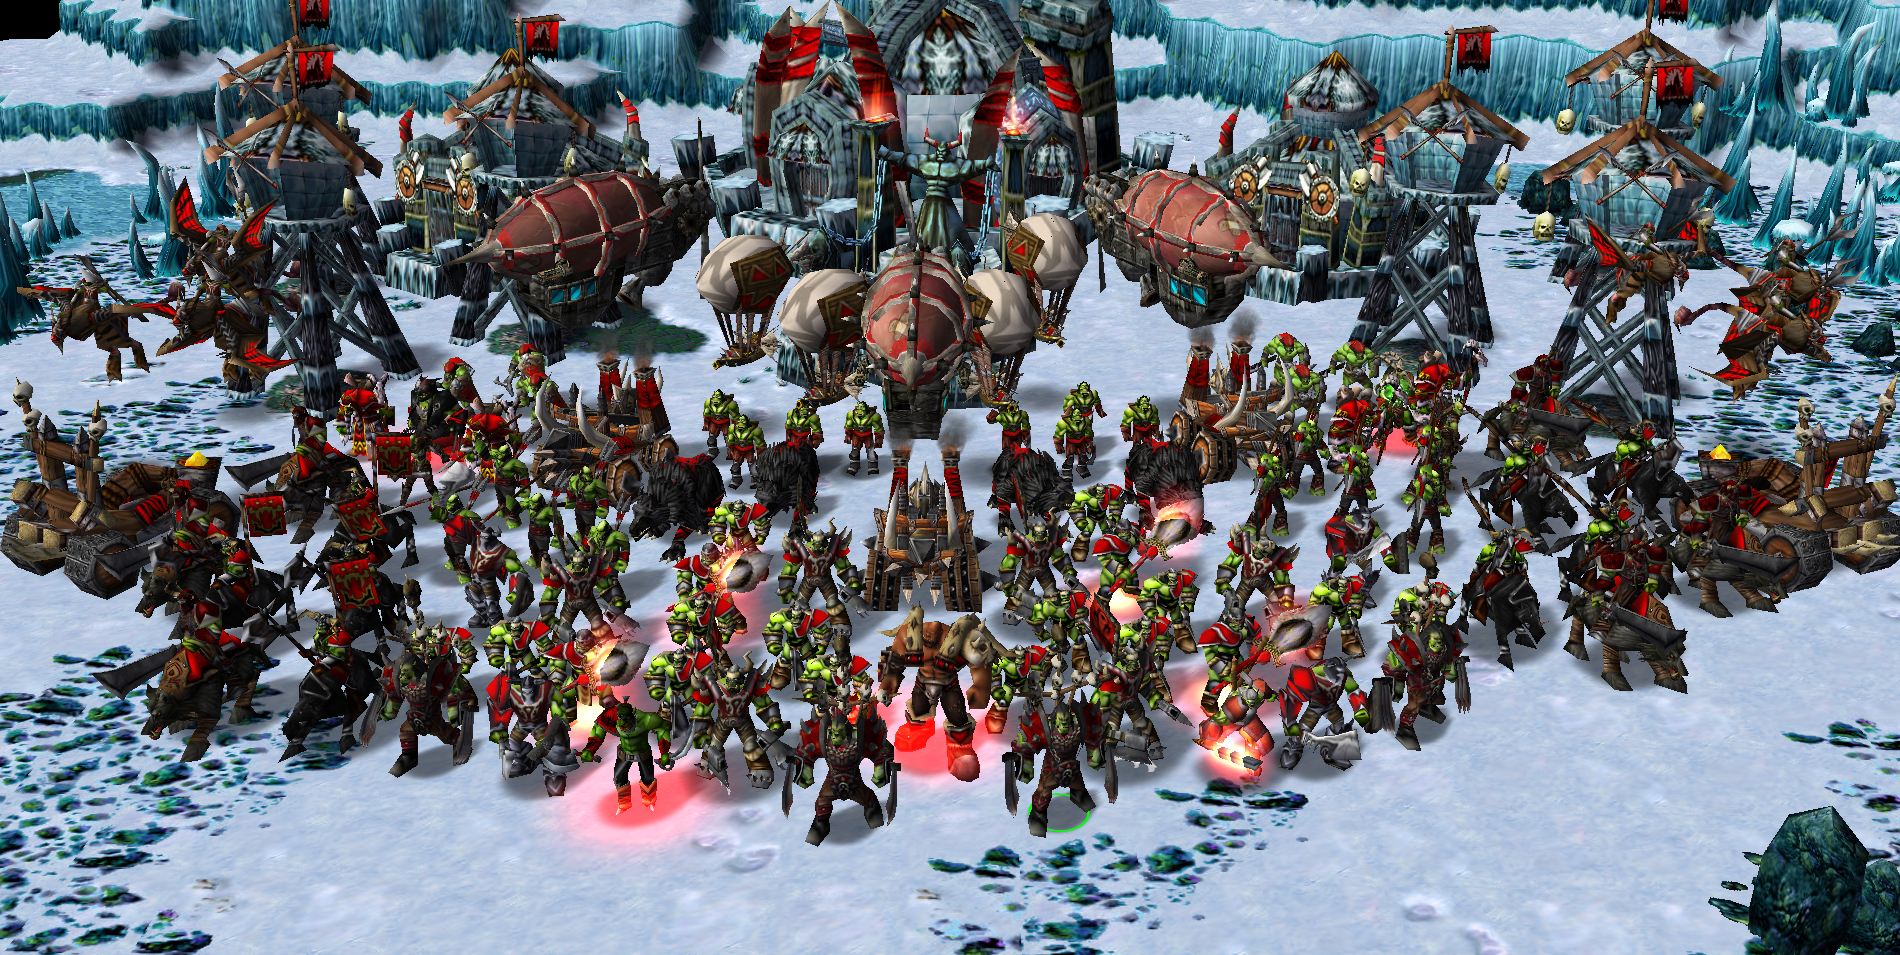 Northrend Horde Offensive
- Full army